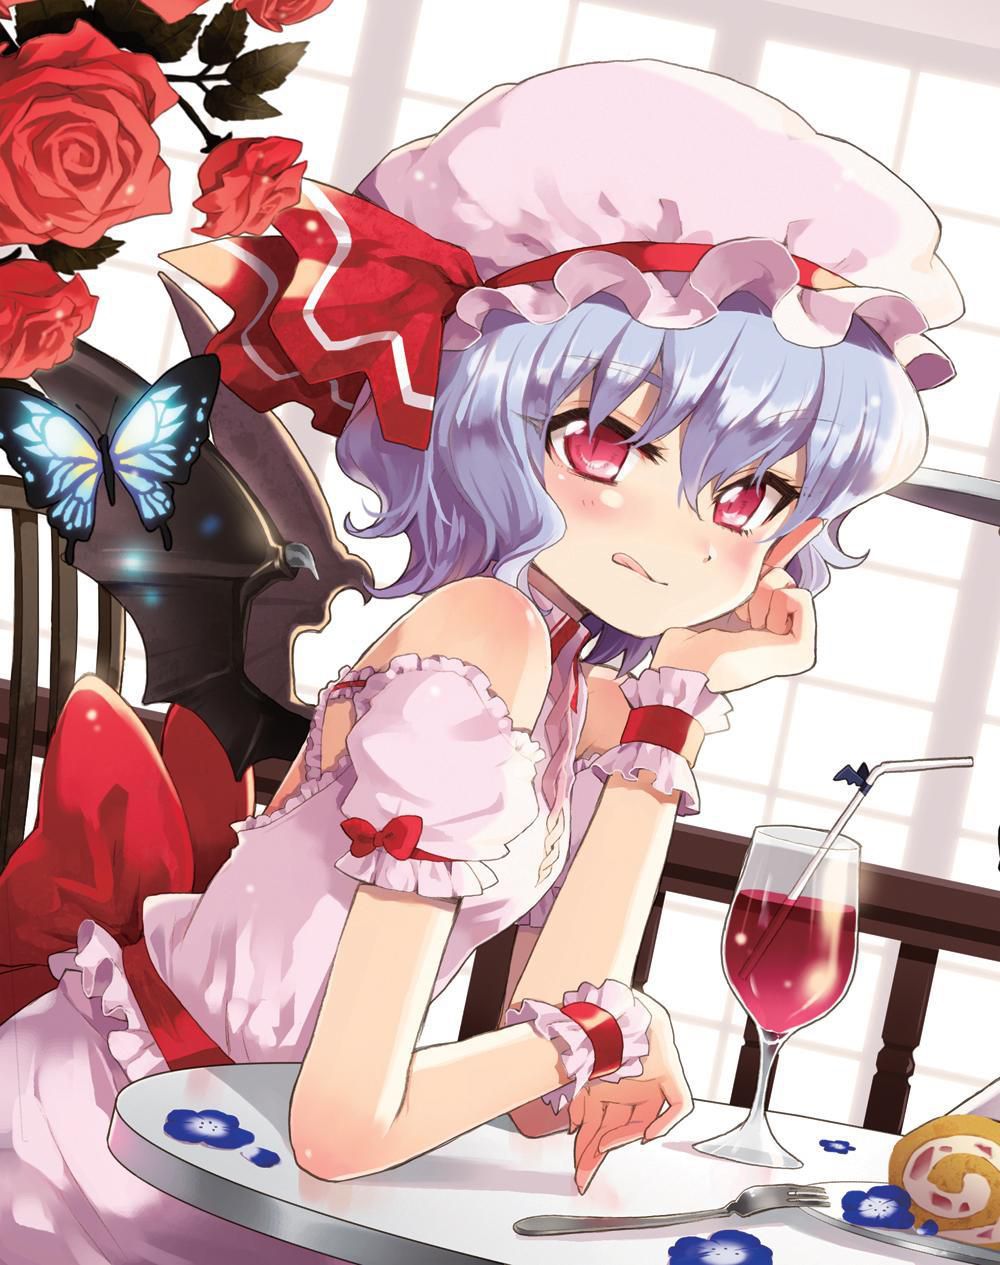 Charm of the touhou Project examined in erotic pictures 18